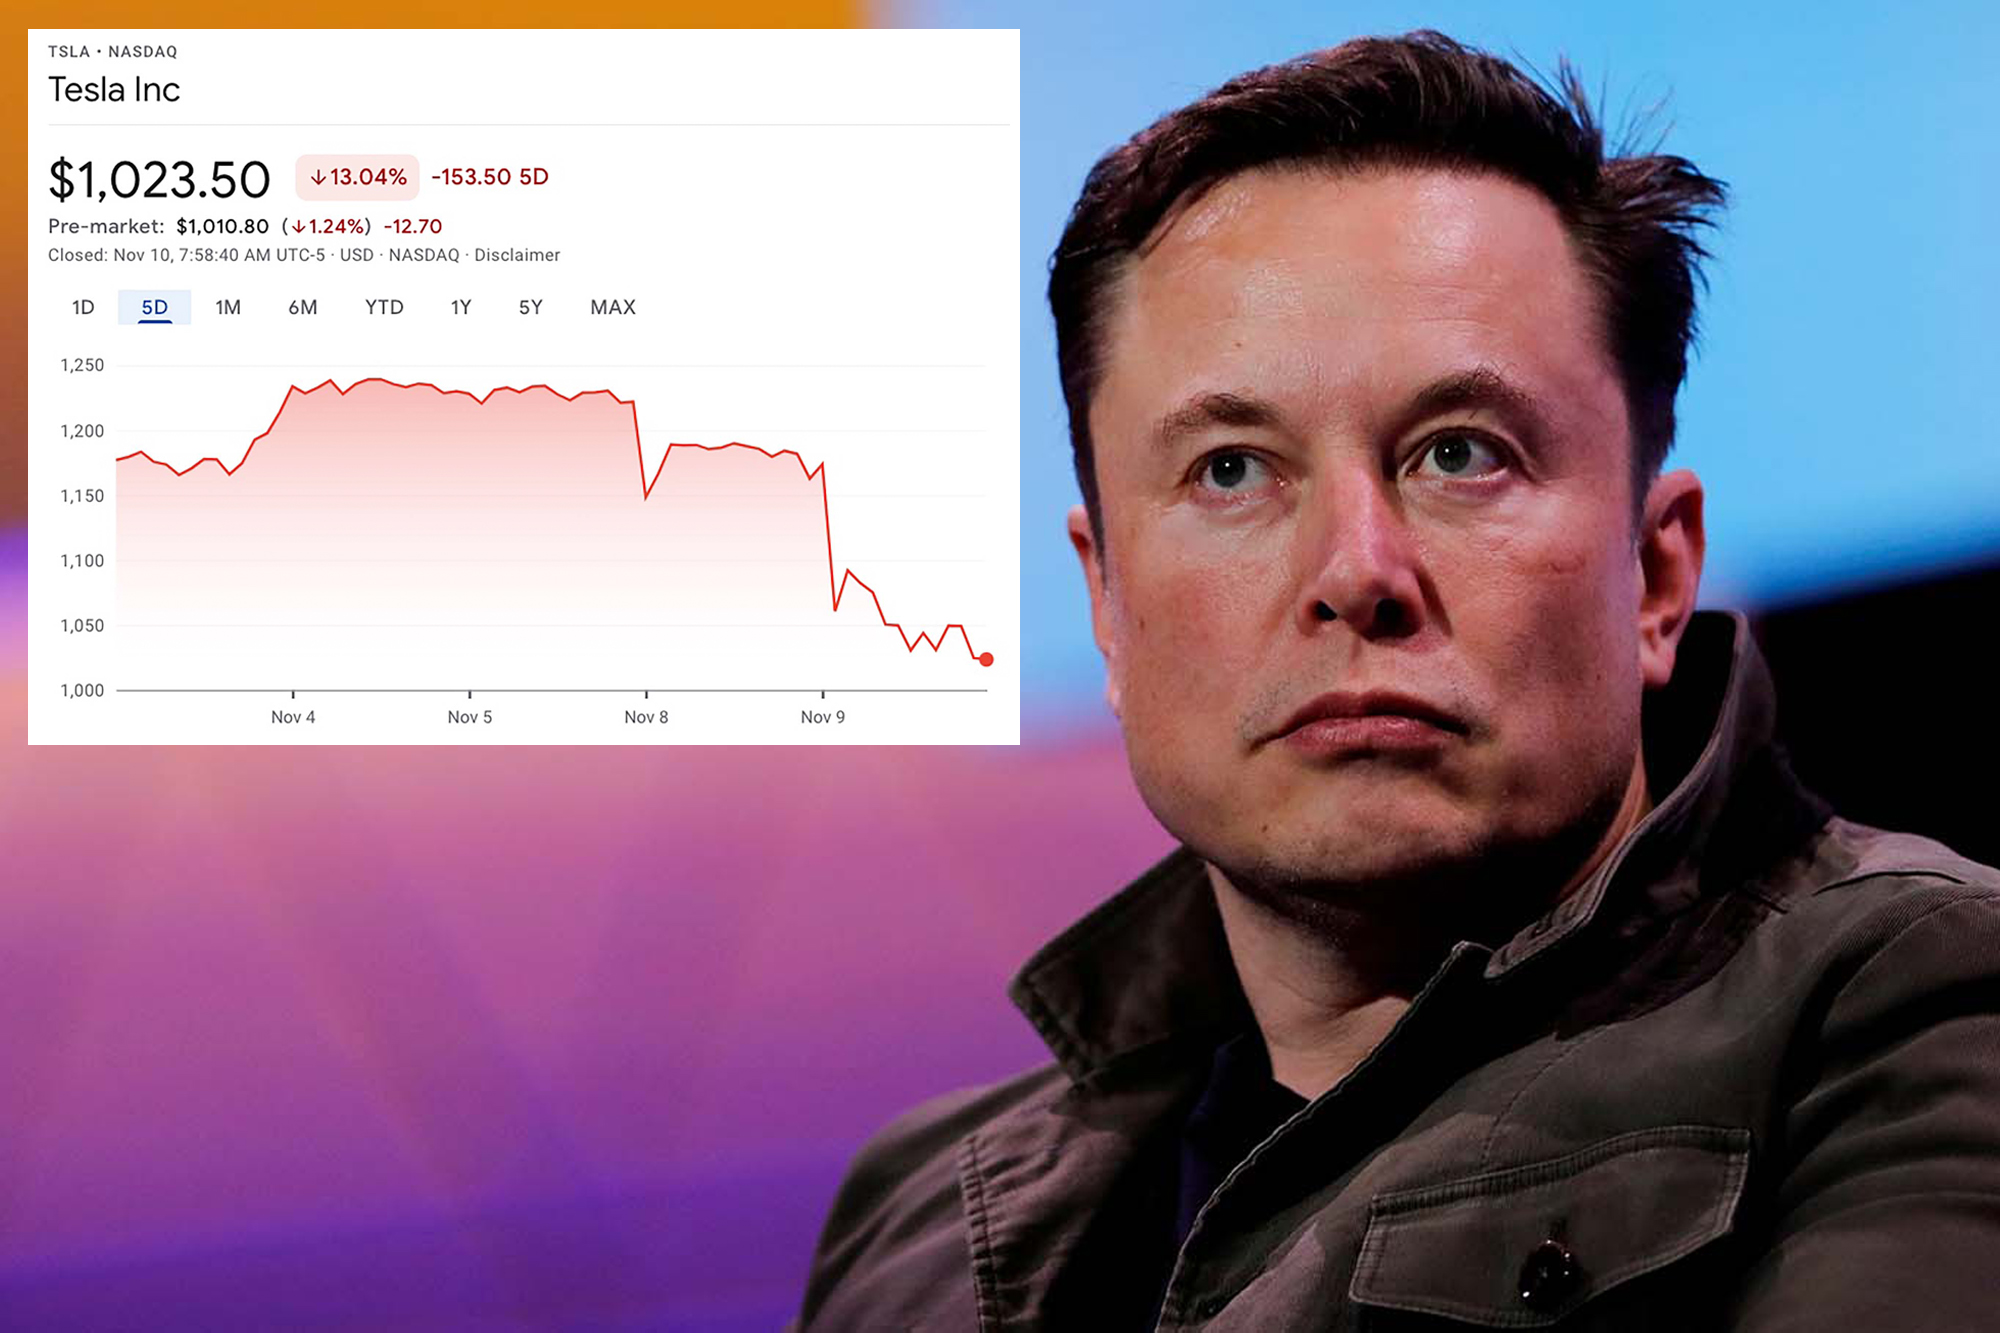 Elon Musk is done with Tesla stock